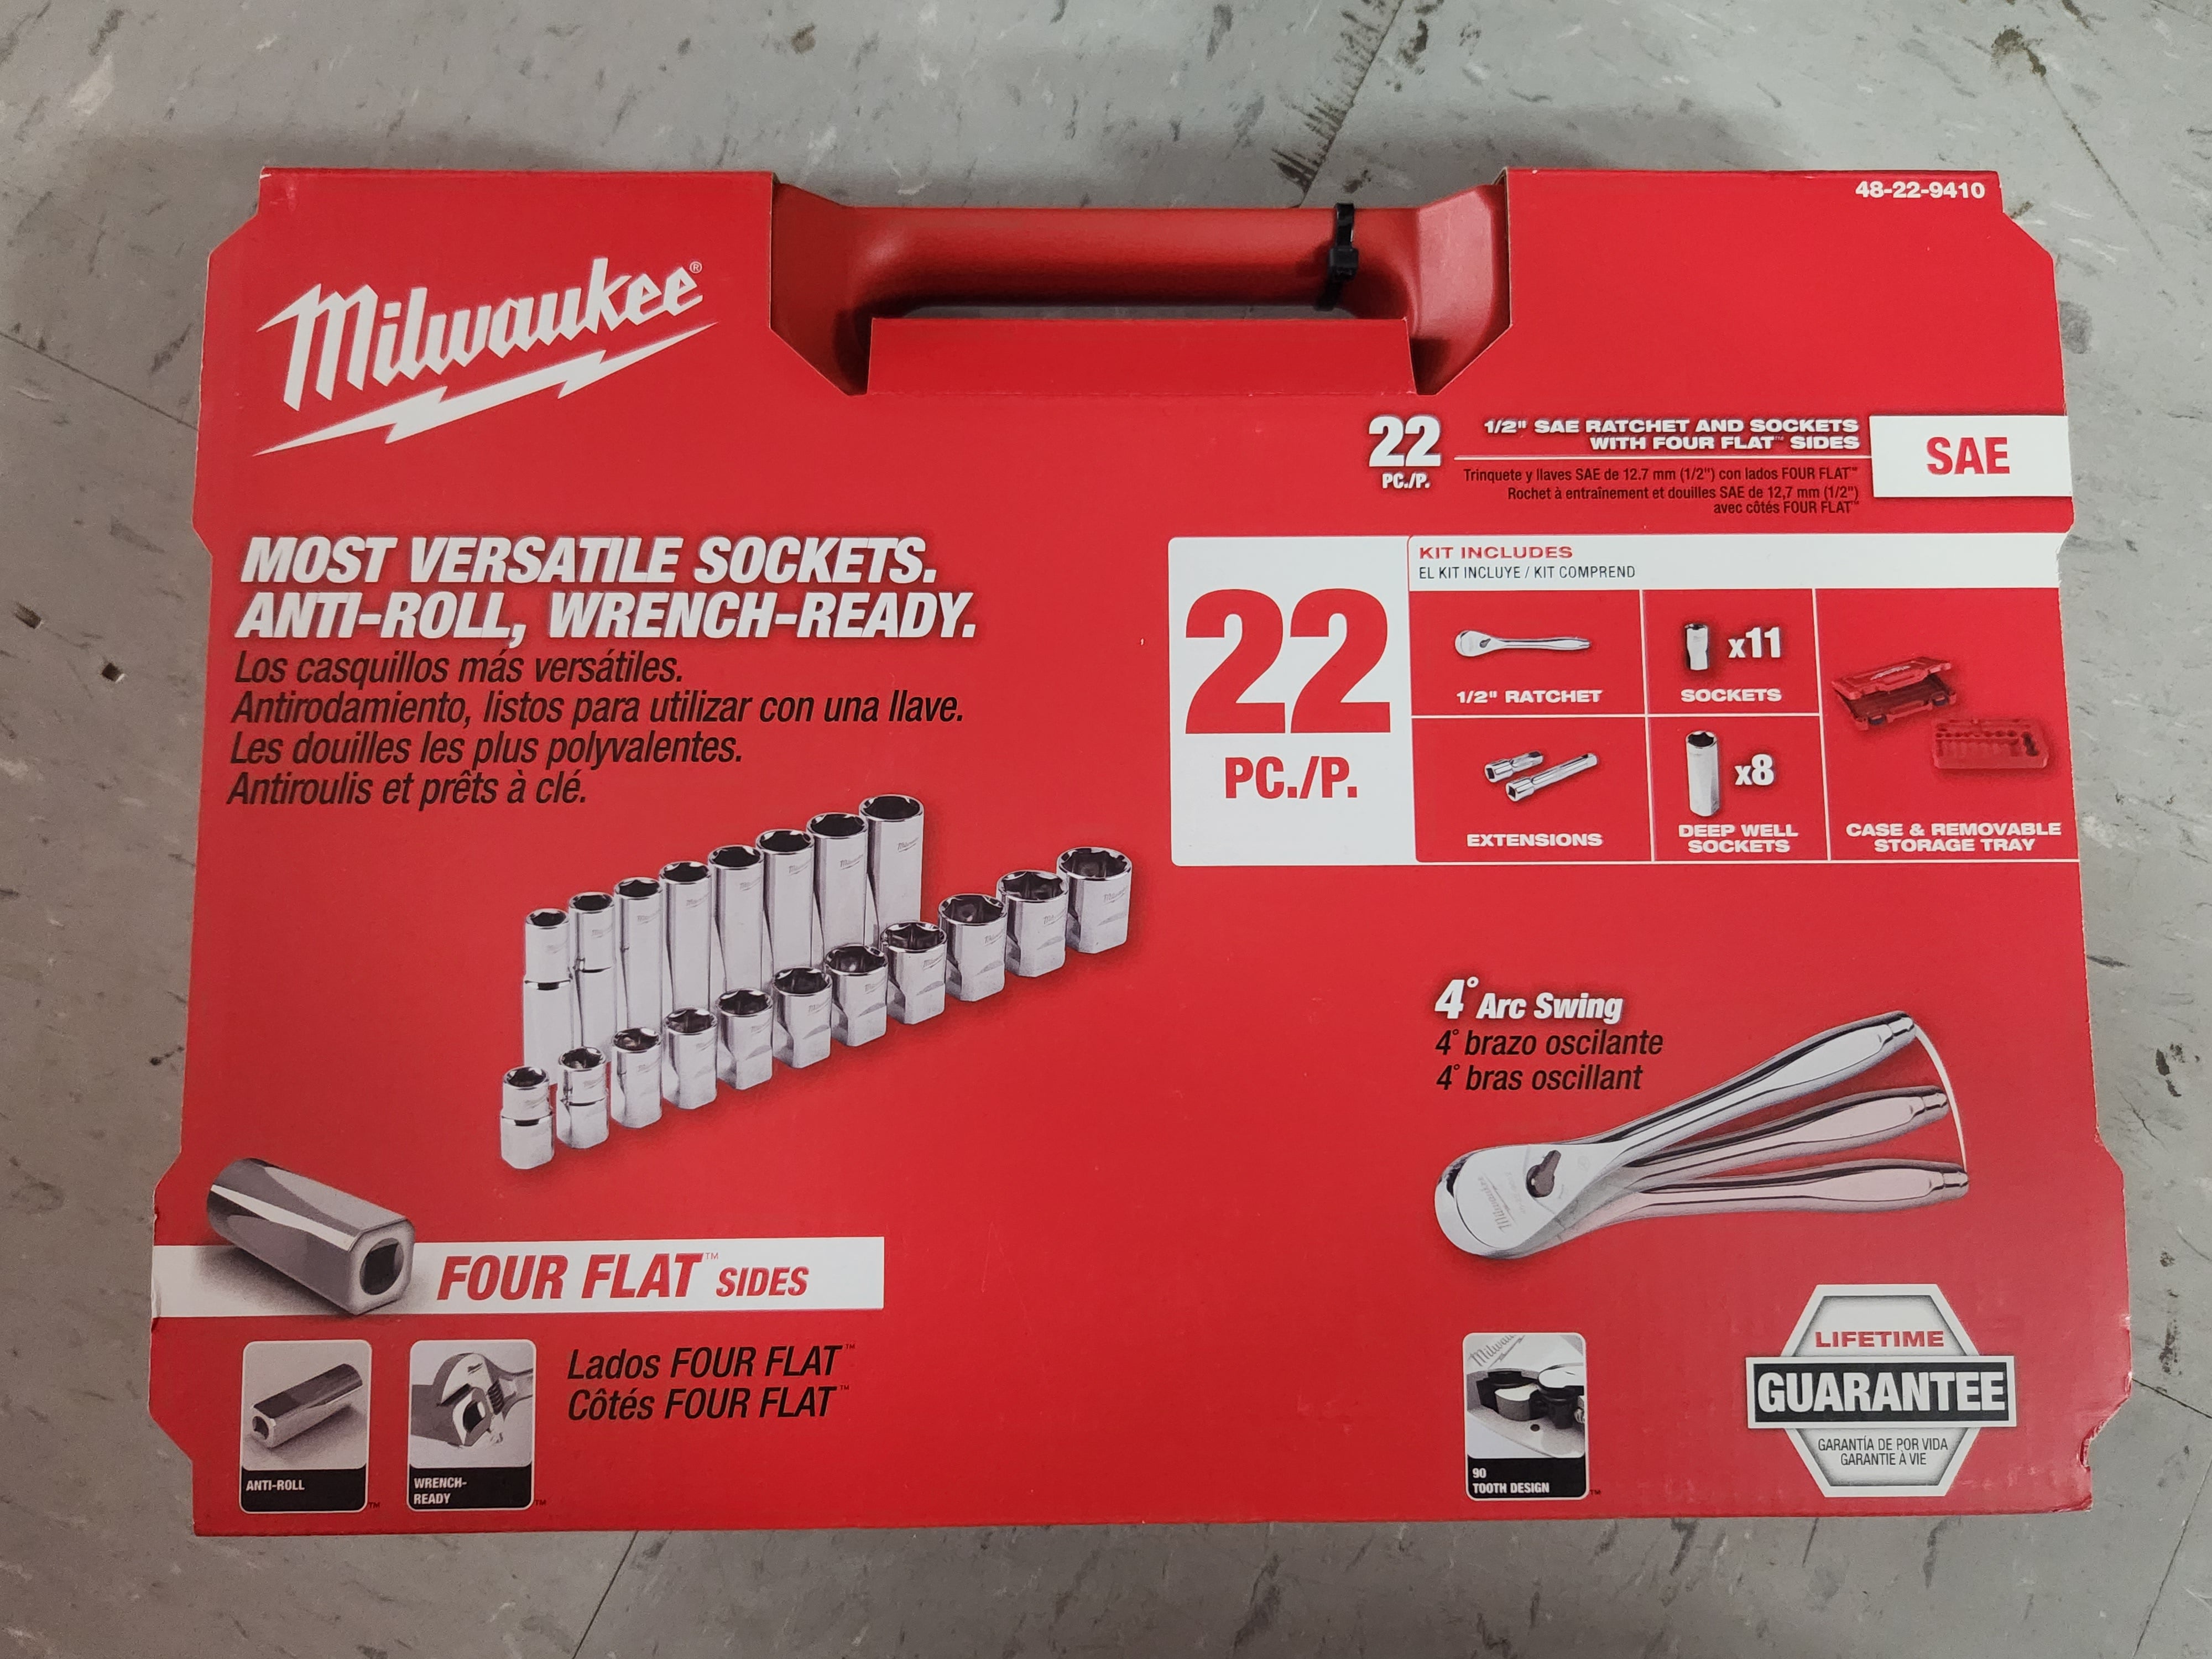 Milwaukee 22 pc 1/2" Drive SAE Ratchet and Socket Set with FOUR FLAT™ Sides 48-22-9410